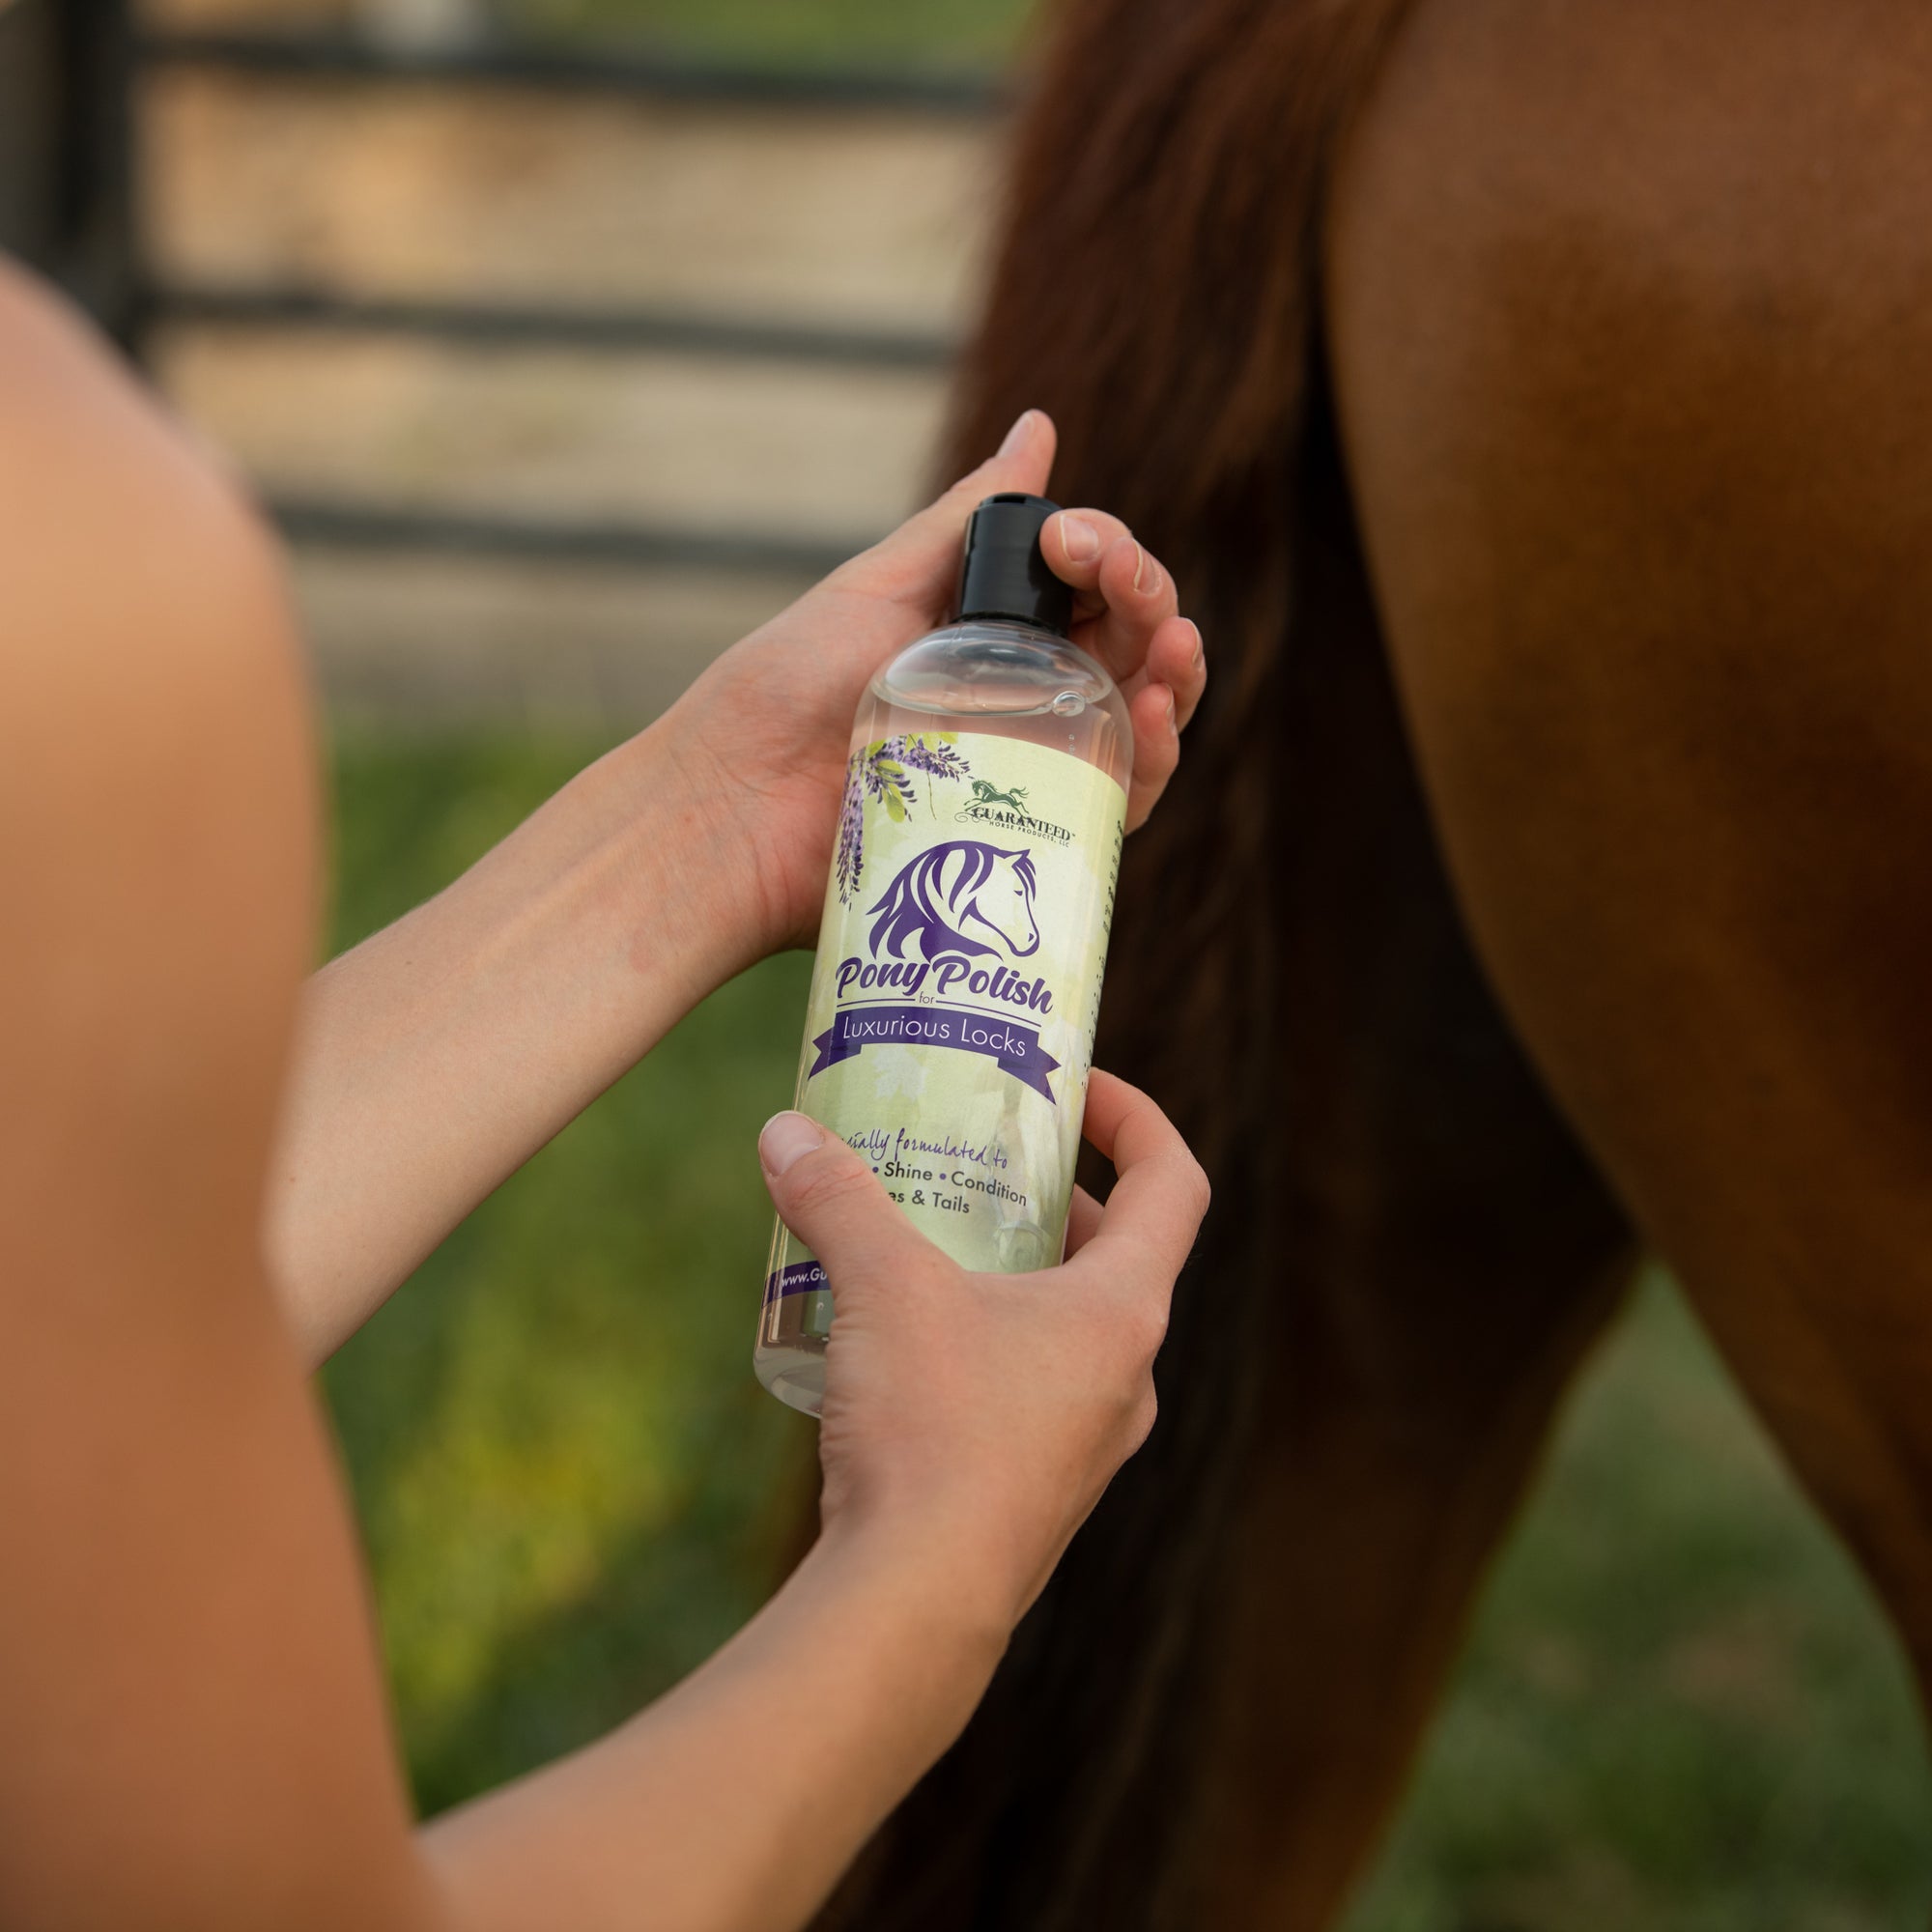 For horse mane and tail detangler use Pony Polish for Luxurious Locks by Guaranteed Horse Products